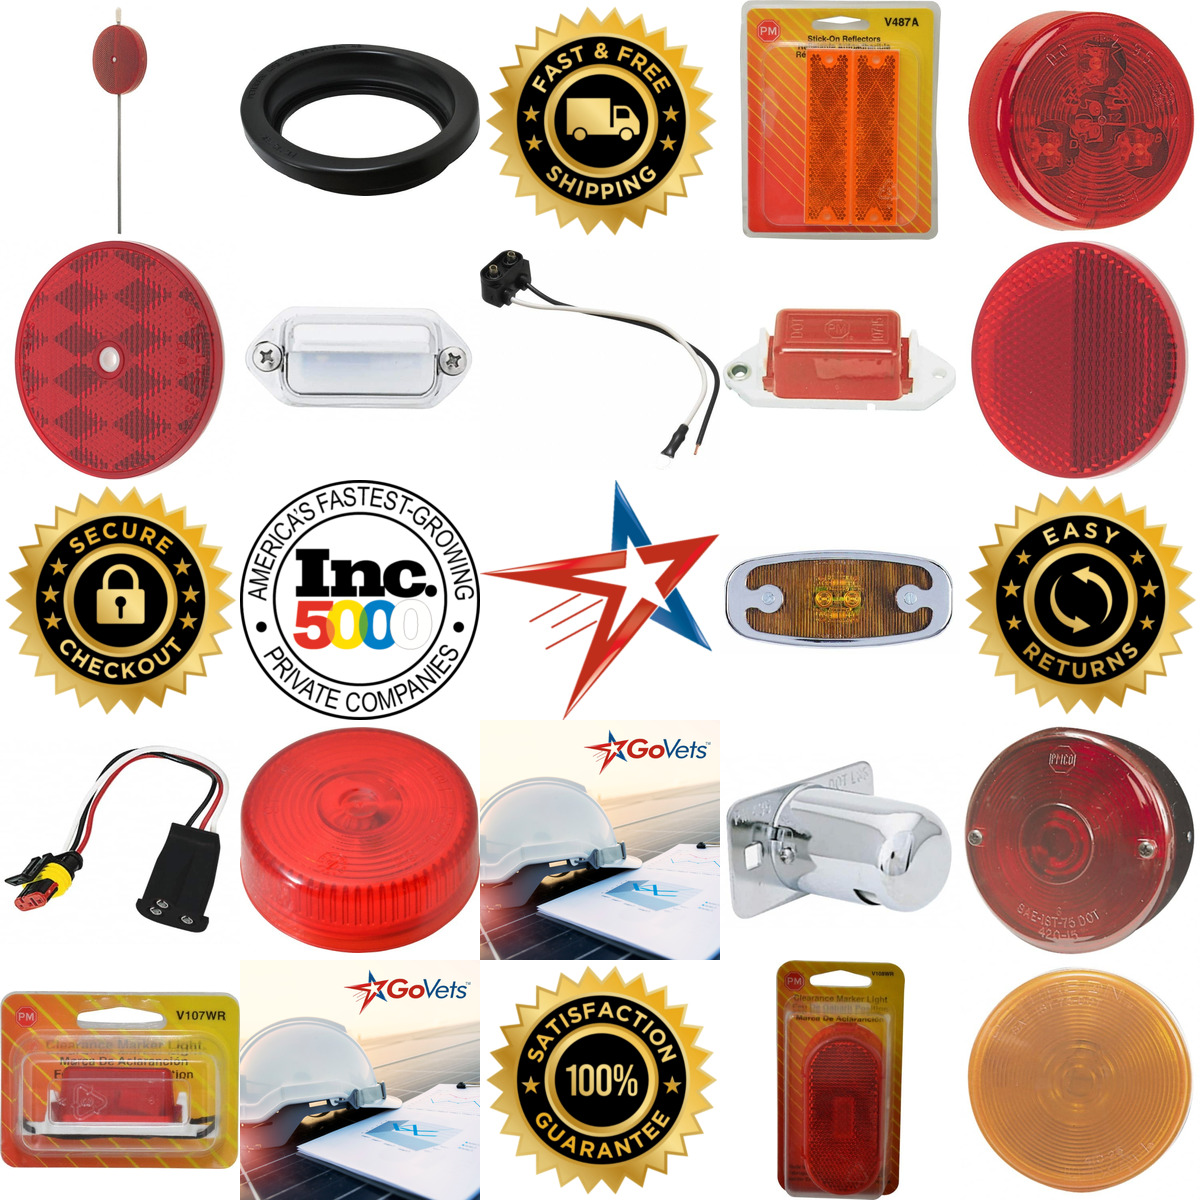 A selection of Lens and Reflectors products on GoVets